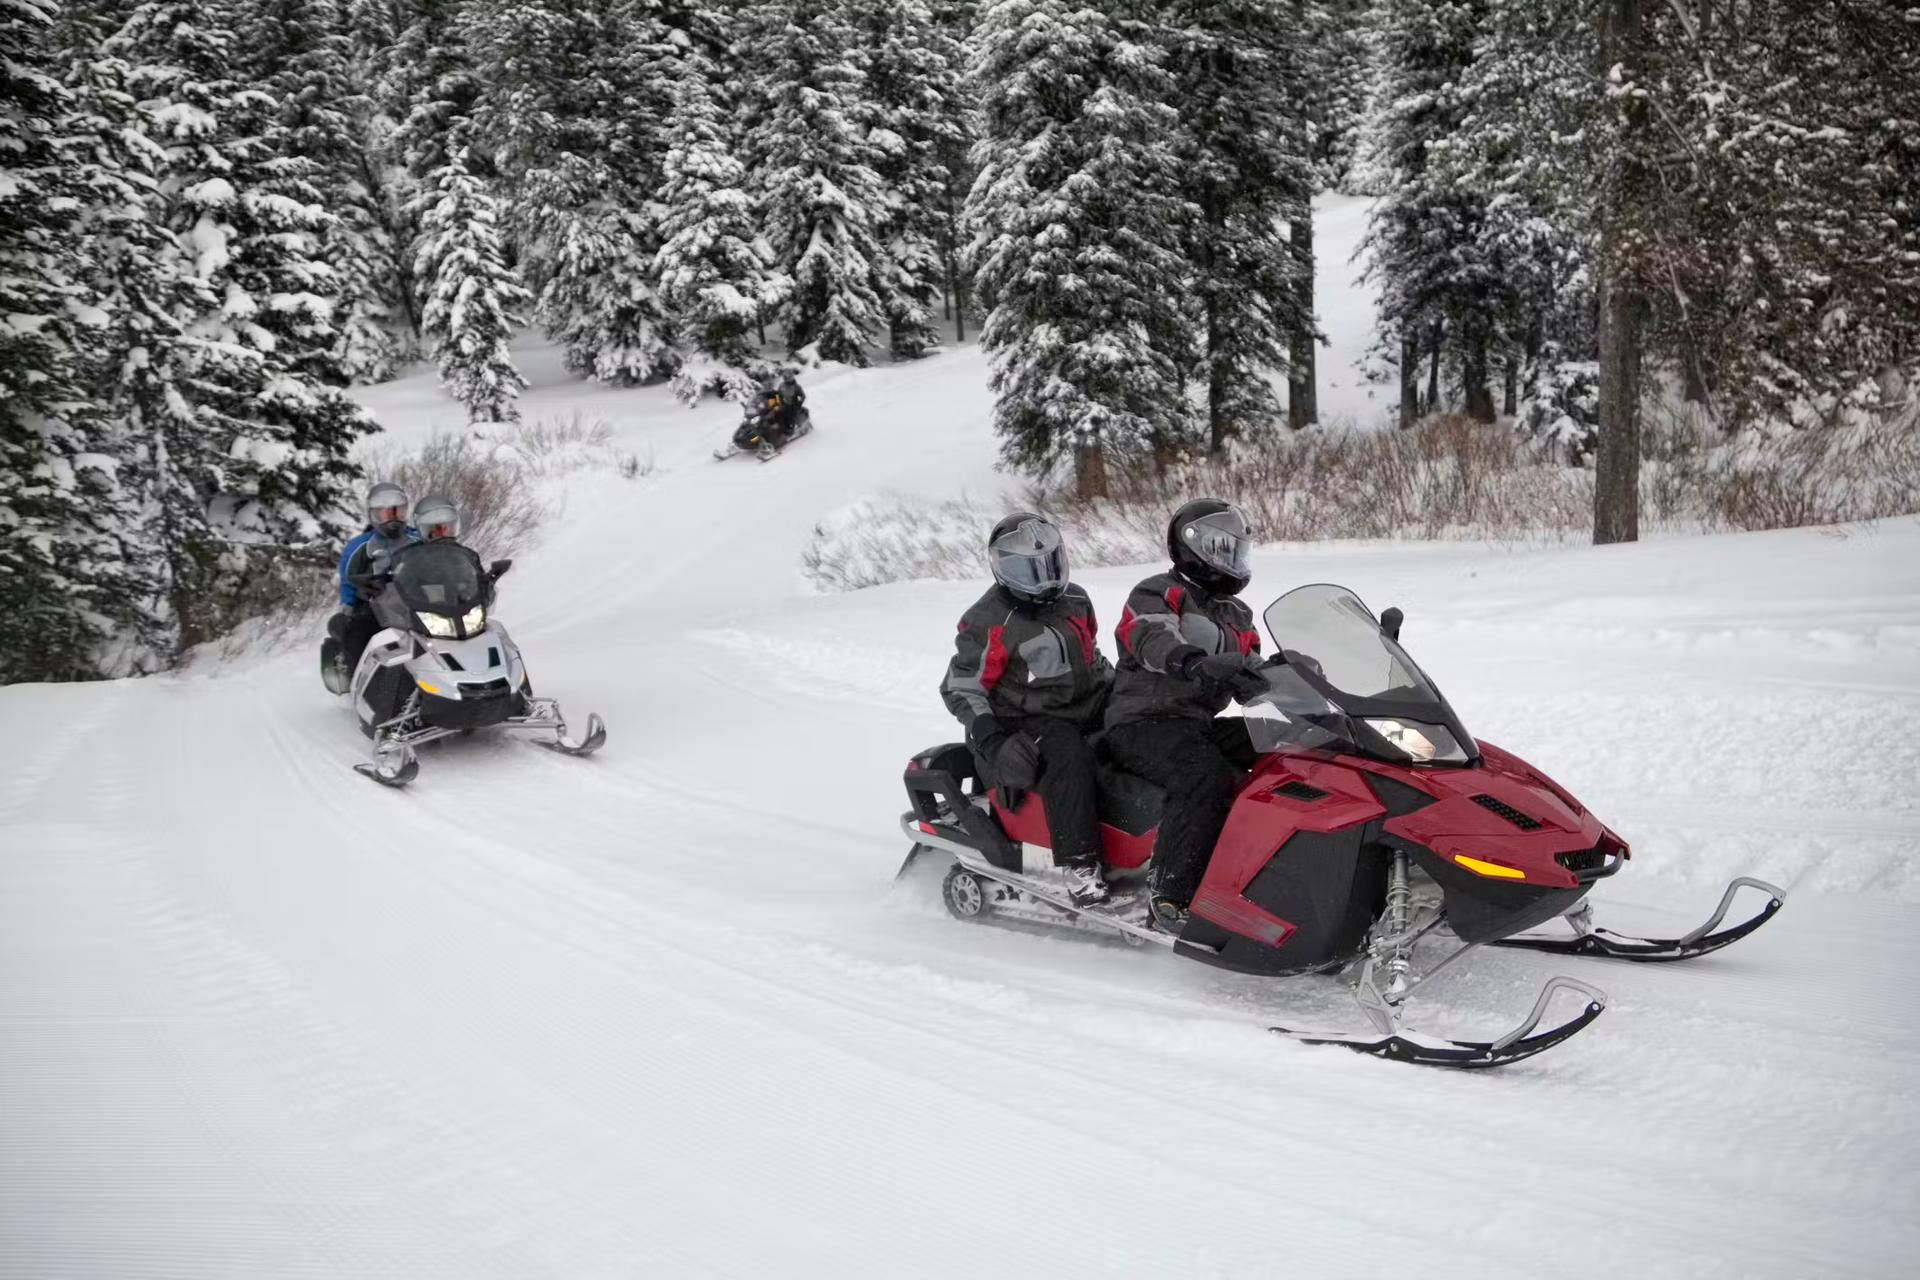 Four people ride on two snowmobiles on a trail through thick snow and woodland in Montana